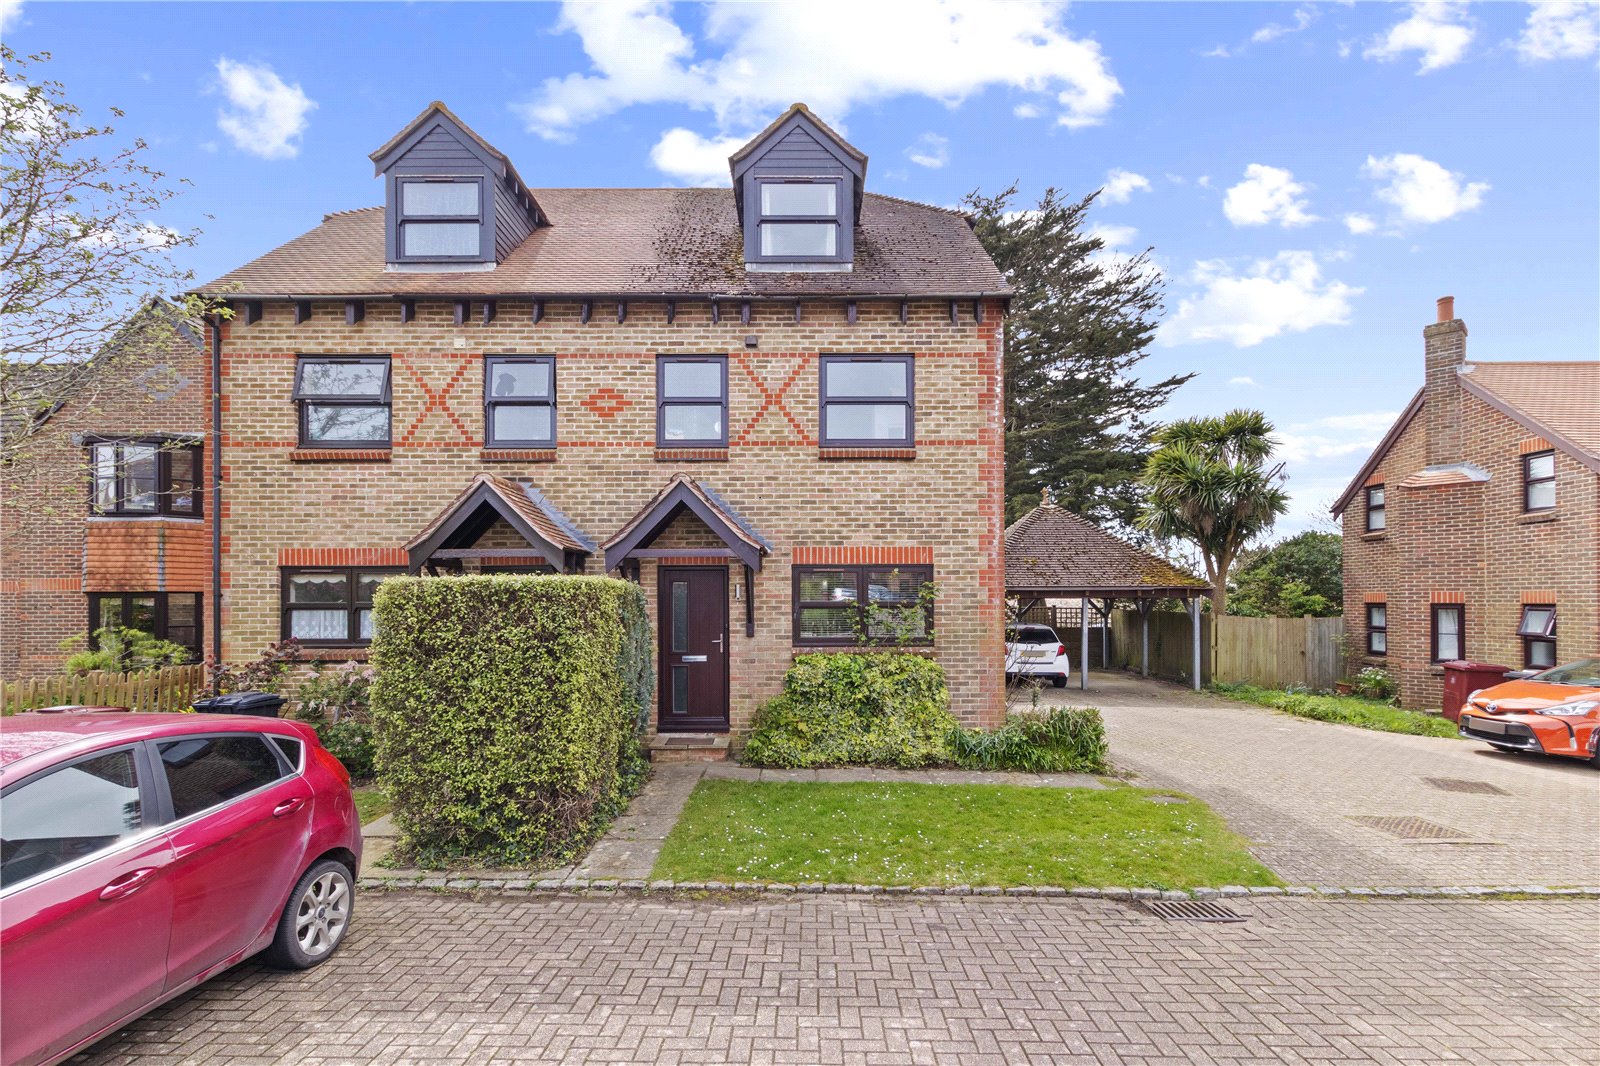 3 bed house for sale in Woodlands Lane, Chichester - Property Image 1